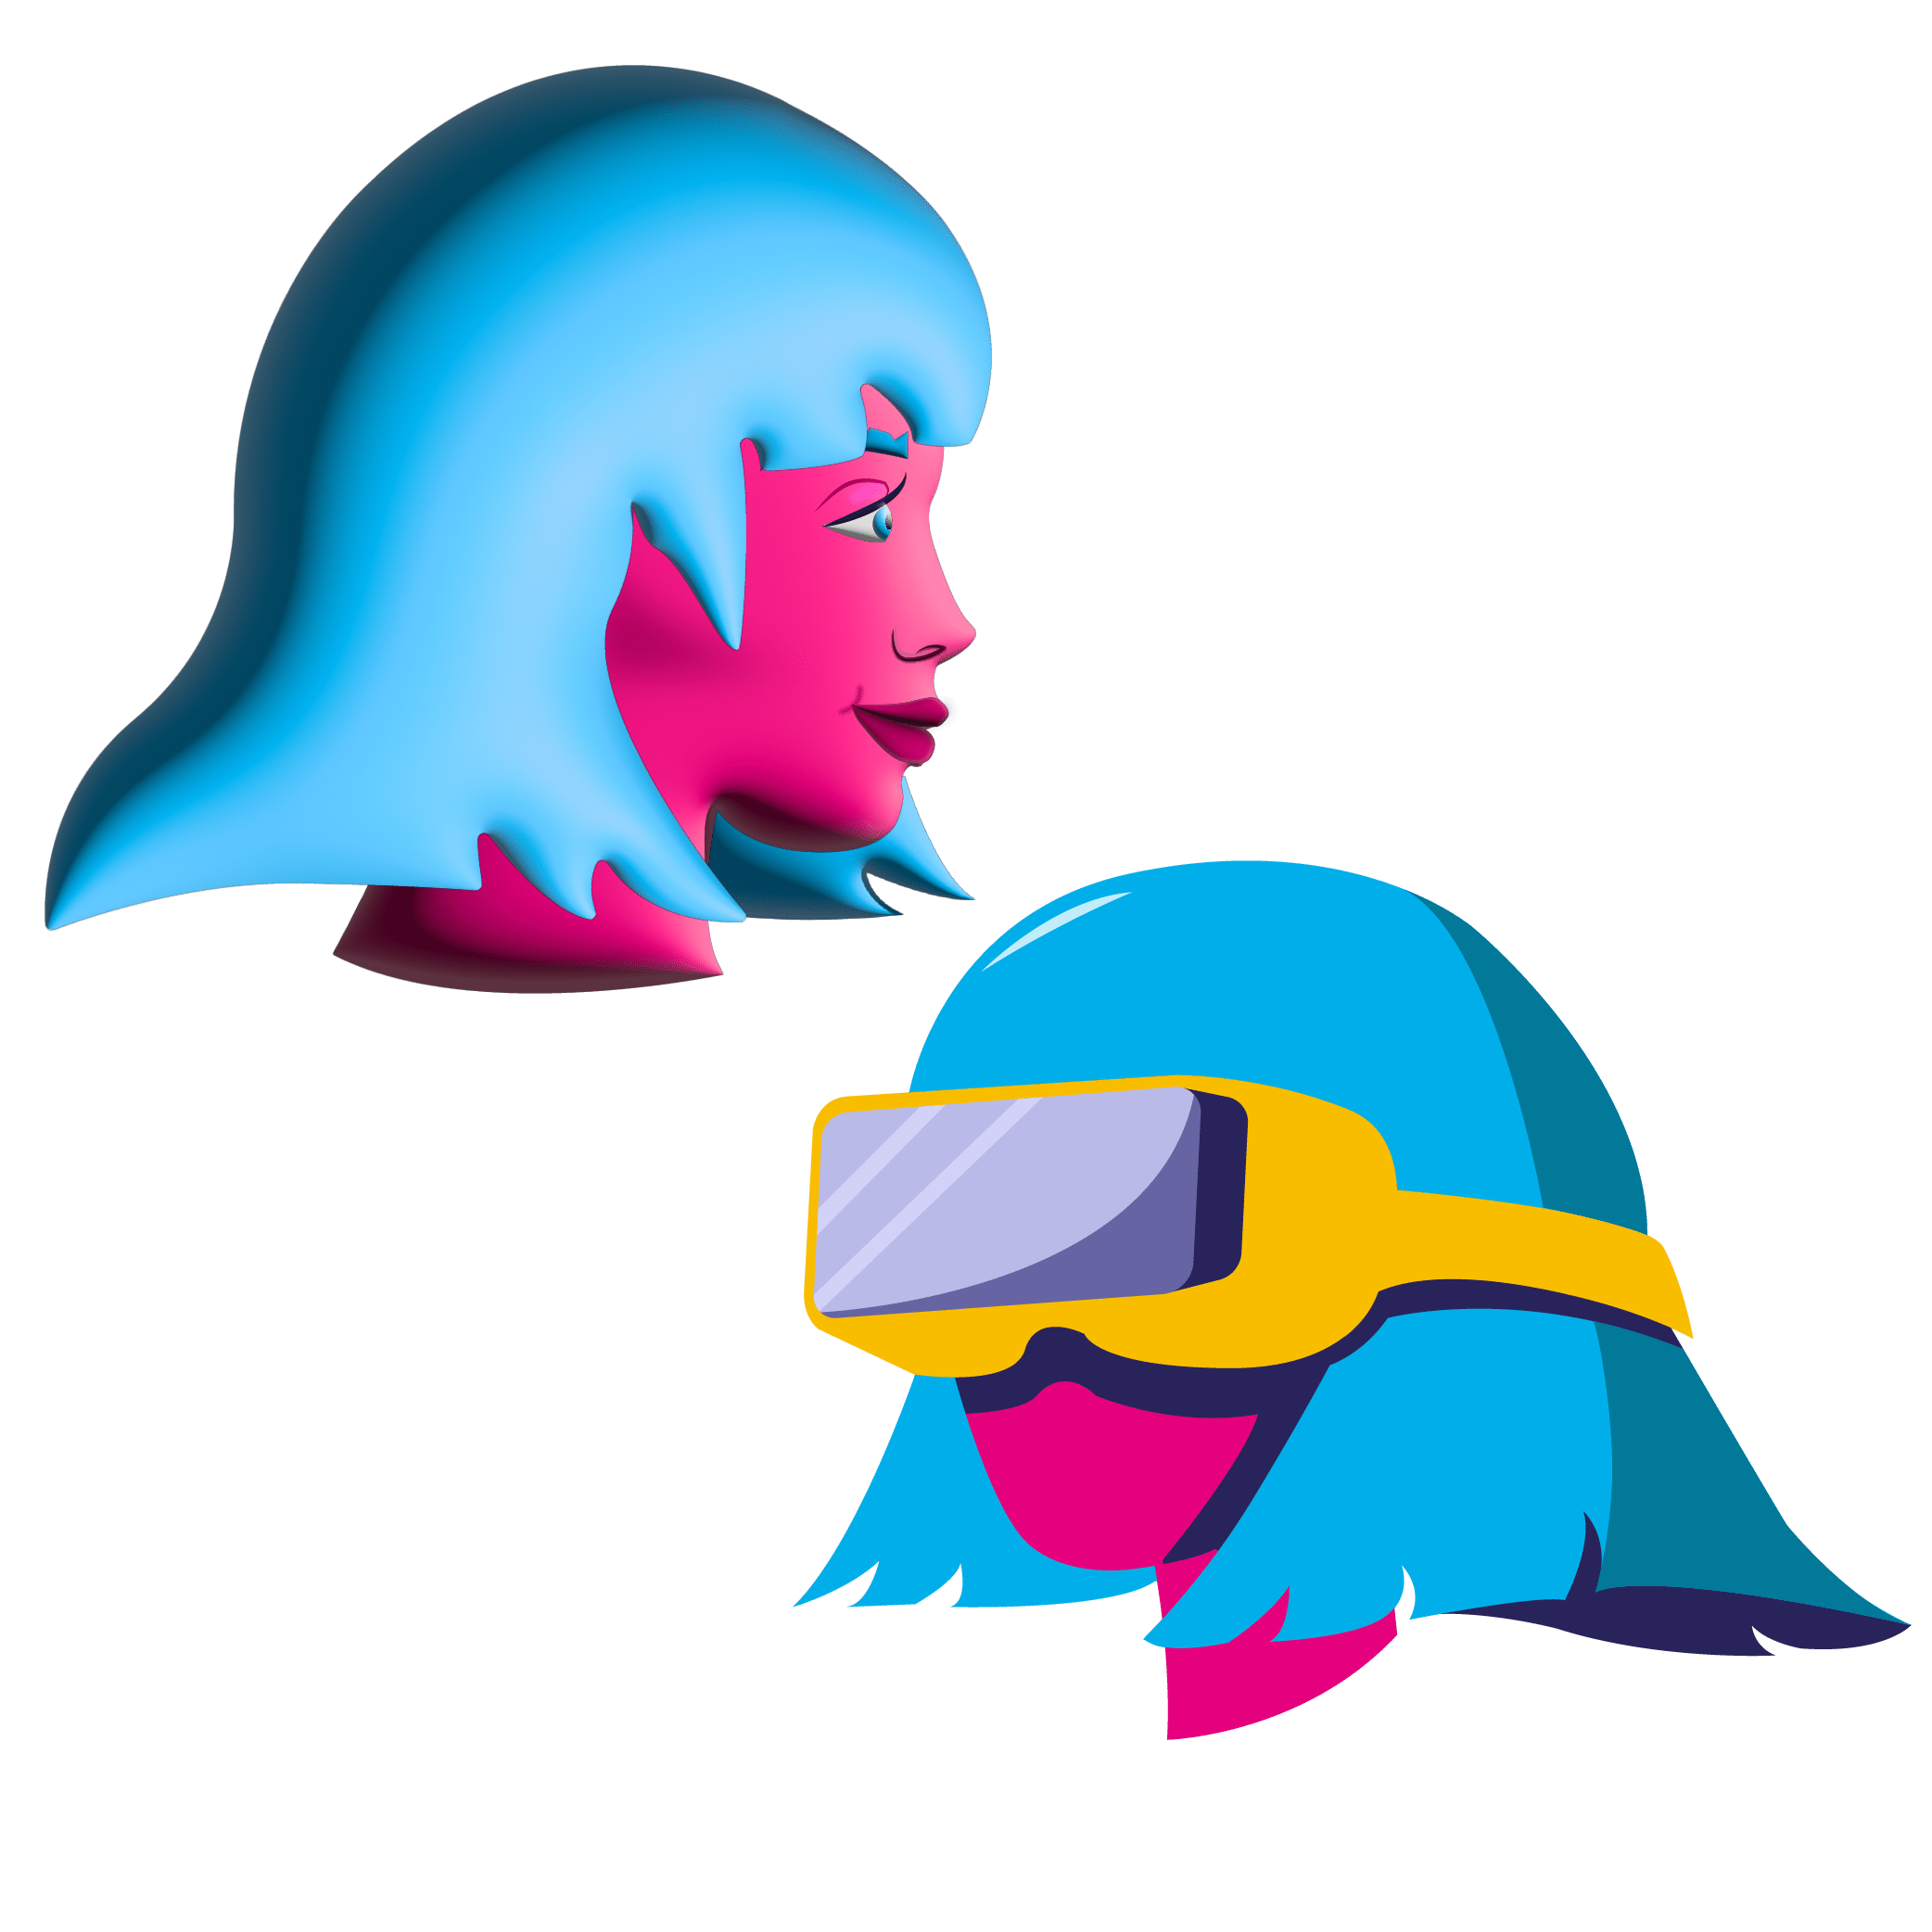 3D Avatar and Illustration of a girl wearing a VR headset